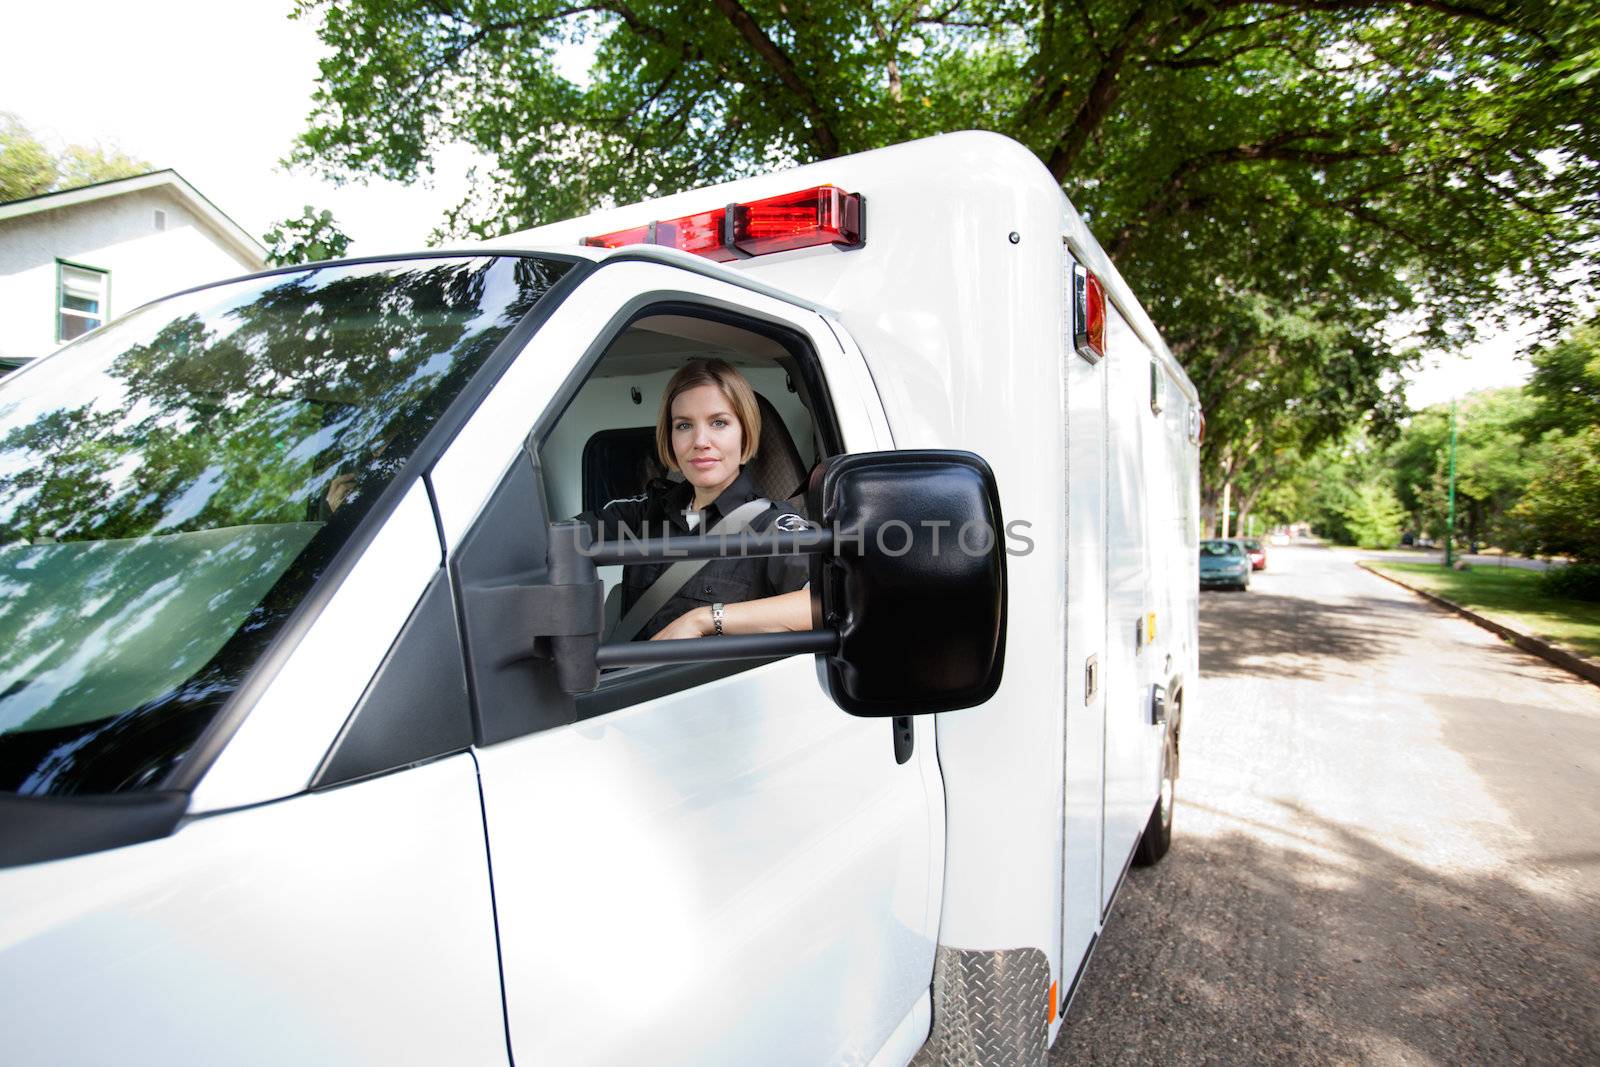 Portrait of a paramedic woman driving an ambulance in a residential city area